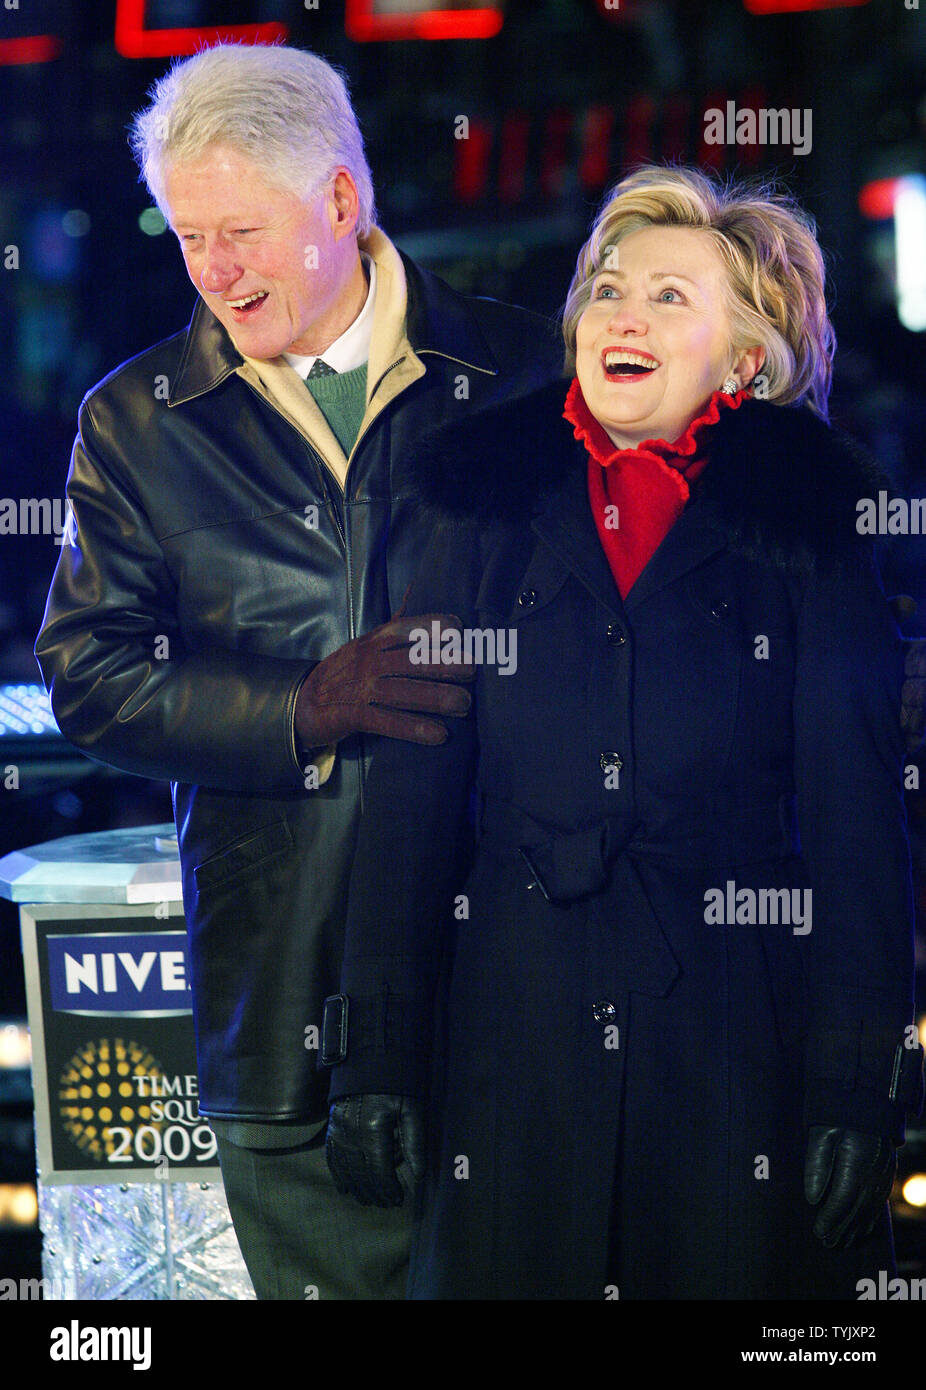 Former President Bill Clinton and his wife U.S. Senator Hillary Rodham Clinton (D-NY) embrace at midnight in Times Square during the New Year's Eve celebration on December 31, 2008 in New York City. (UPI Photo/Monika Graff) Stock Photo